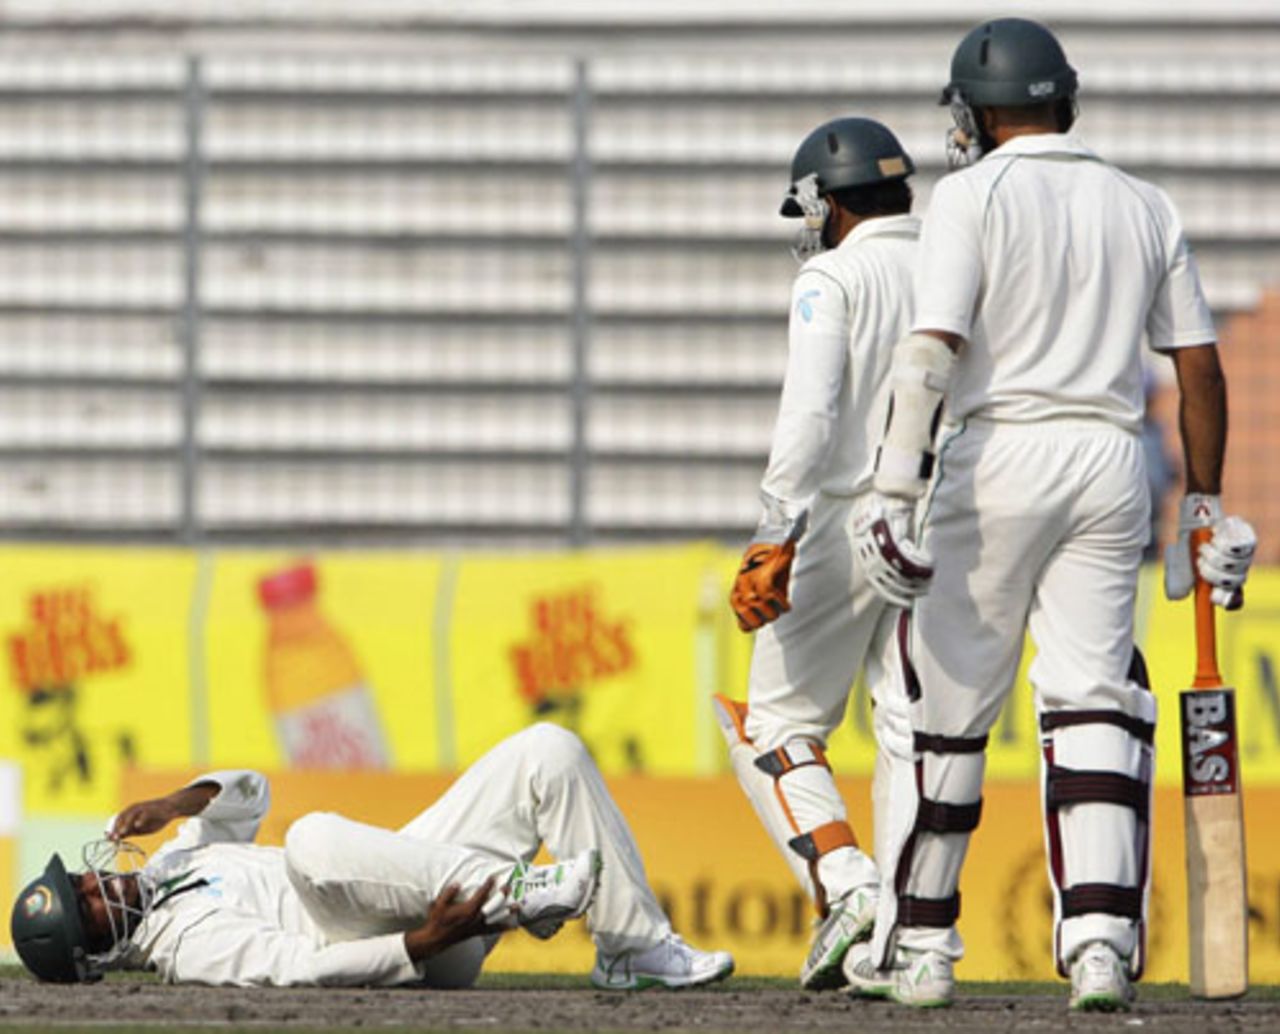 Aftab Ahmed reacts after being hit by a Hashim Amla shot, Bangladesh v South Africa, 1st Test, Mirpur, 3rd day, February 24, 2008 